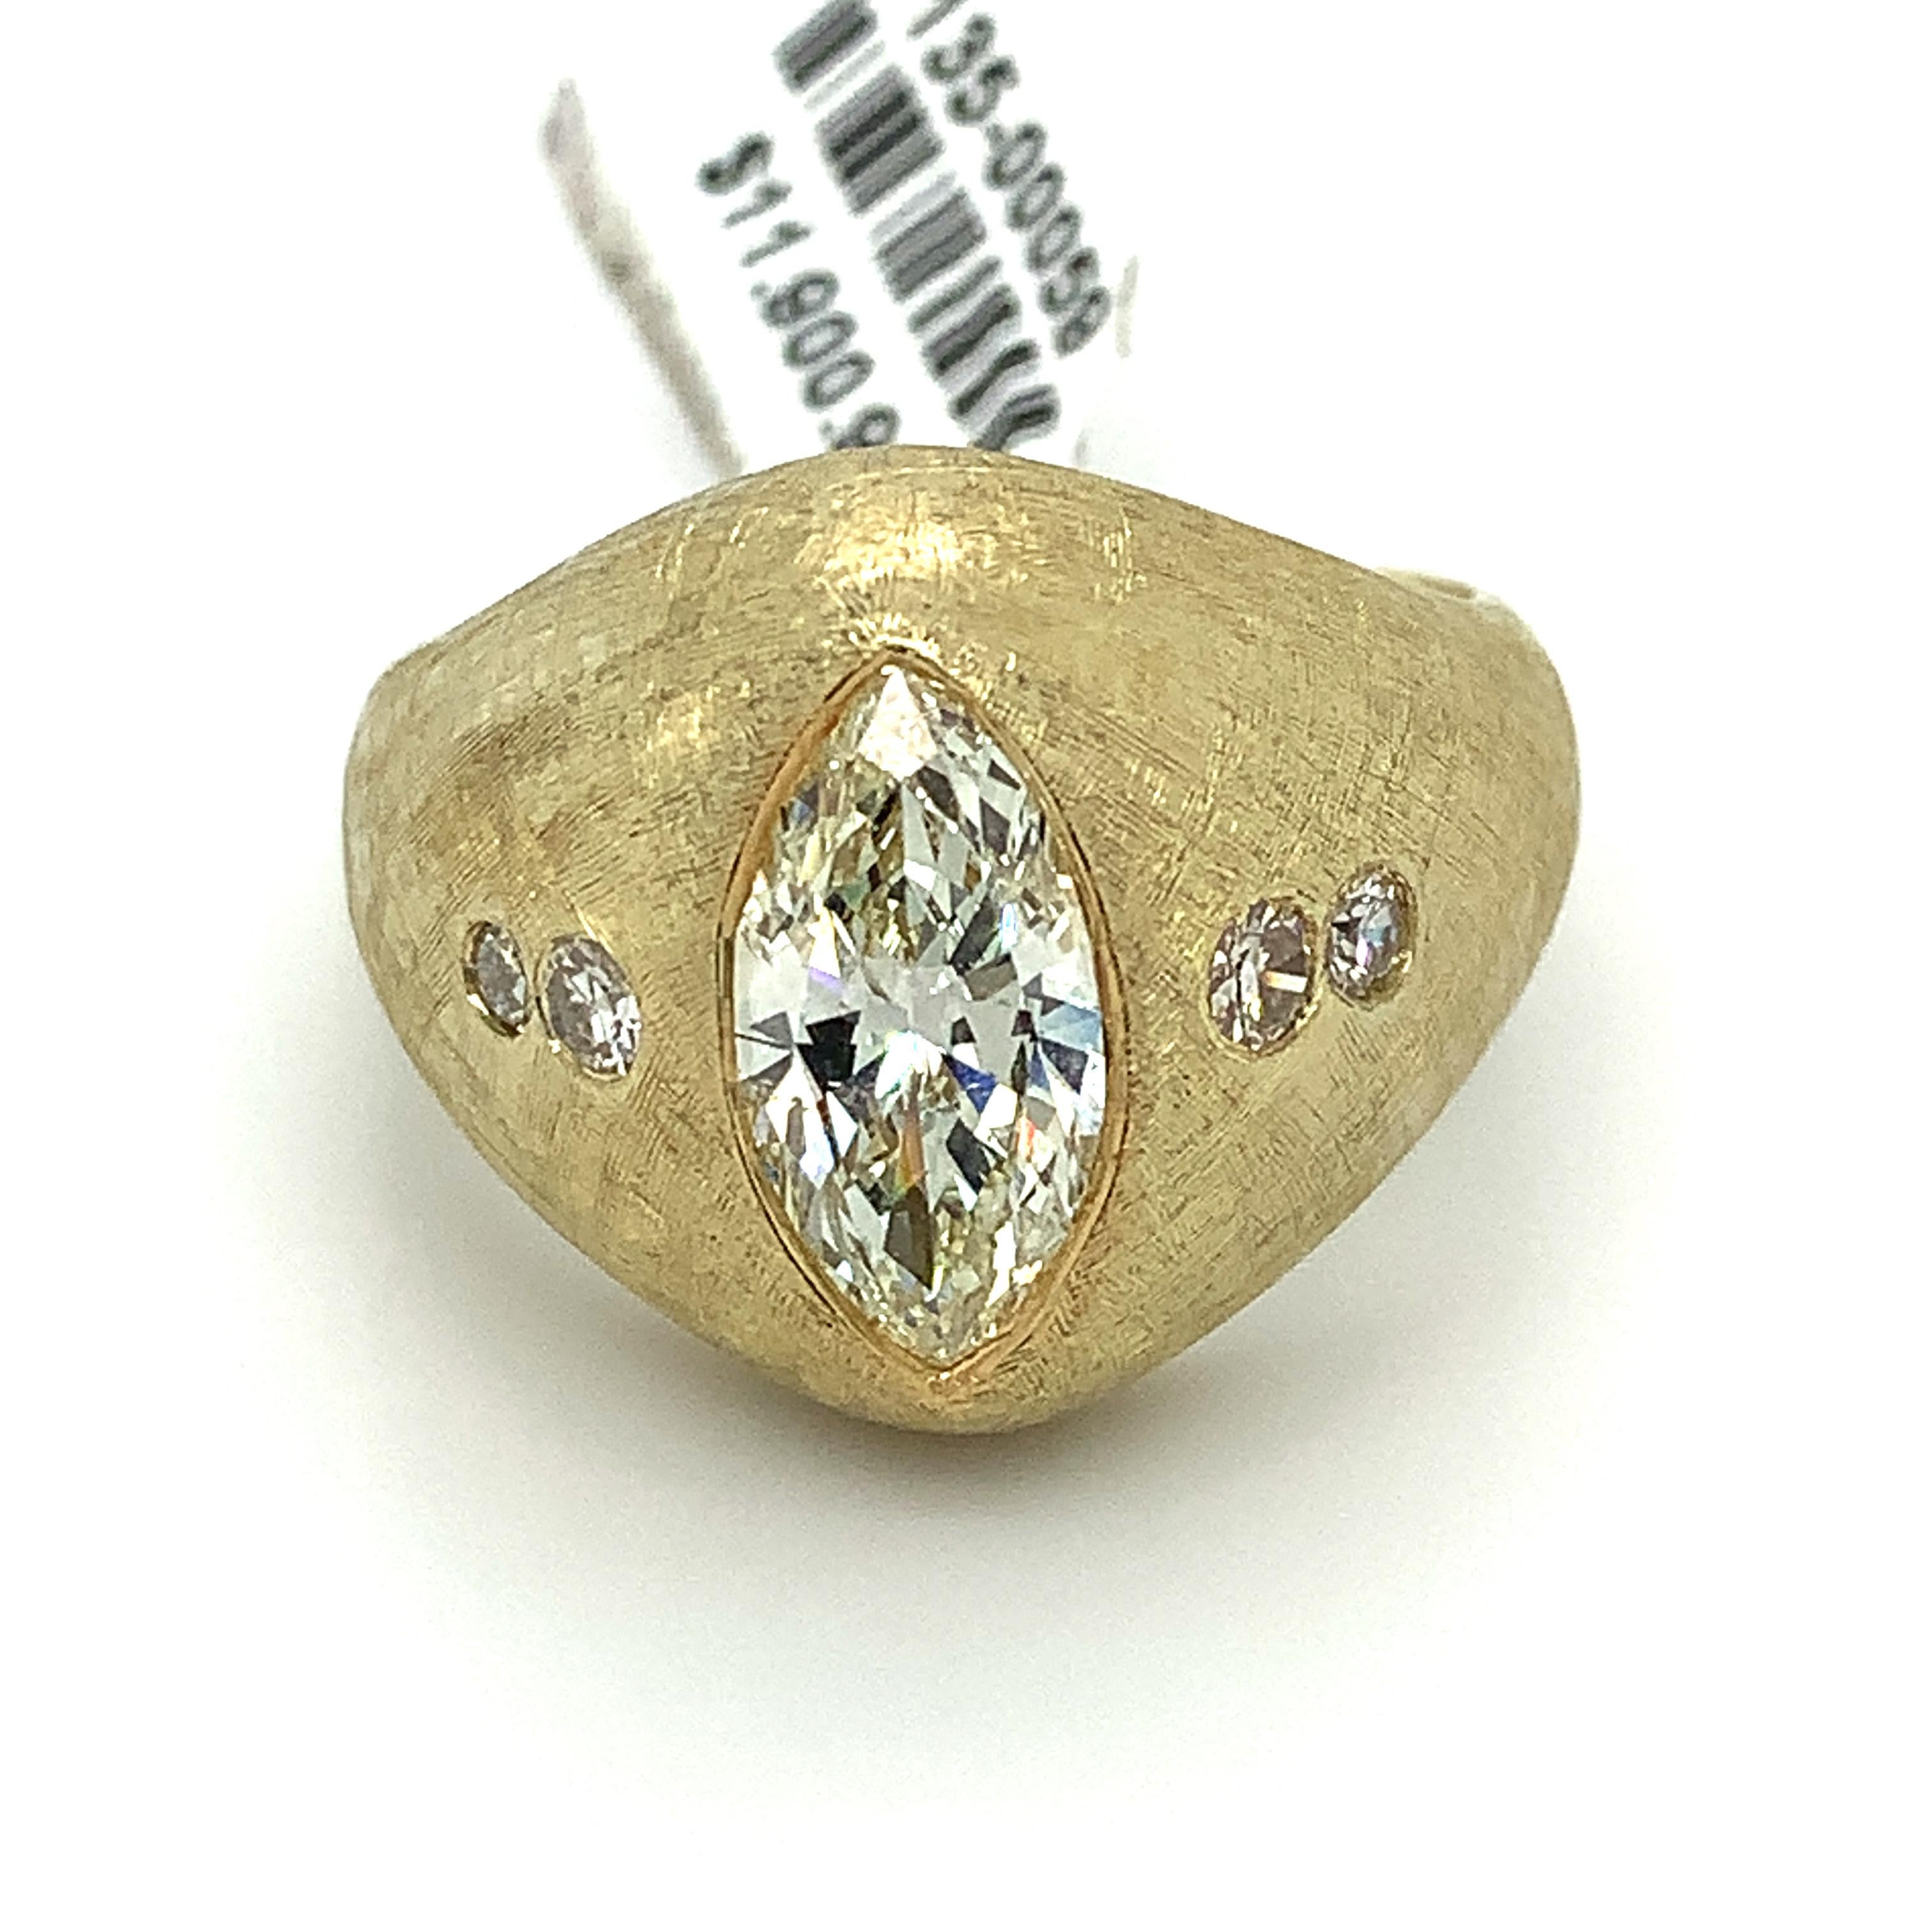 14k Yellow Gold  Marquise Diamond With Round Shape Diamond Ring
Size 10.5
4.0 Grams
1 Center Marquise Cut Diamond 2.11 Carats 
Color: K-L 
Clarity: Si2
4 Round White Diamonds 
0.20 Carats Total Weight
Color: I Clarity: Si1